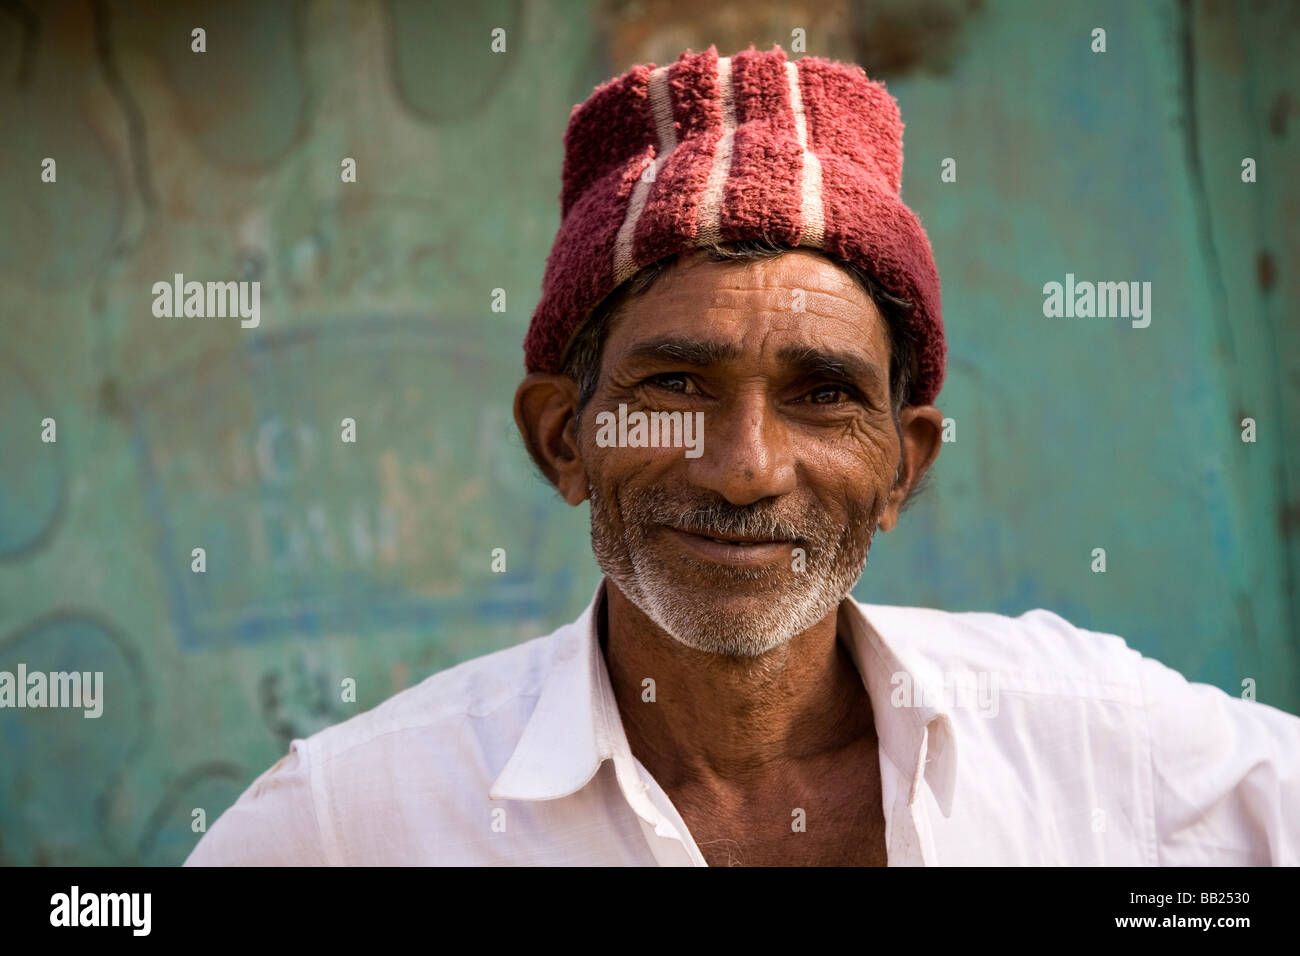 A man in the in the Gujarati town of Sasan, India. He wears a traditional Gujarati regional hat. Stock Photo